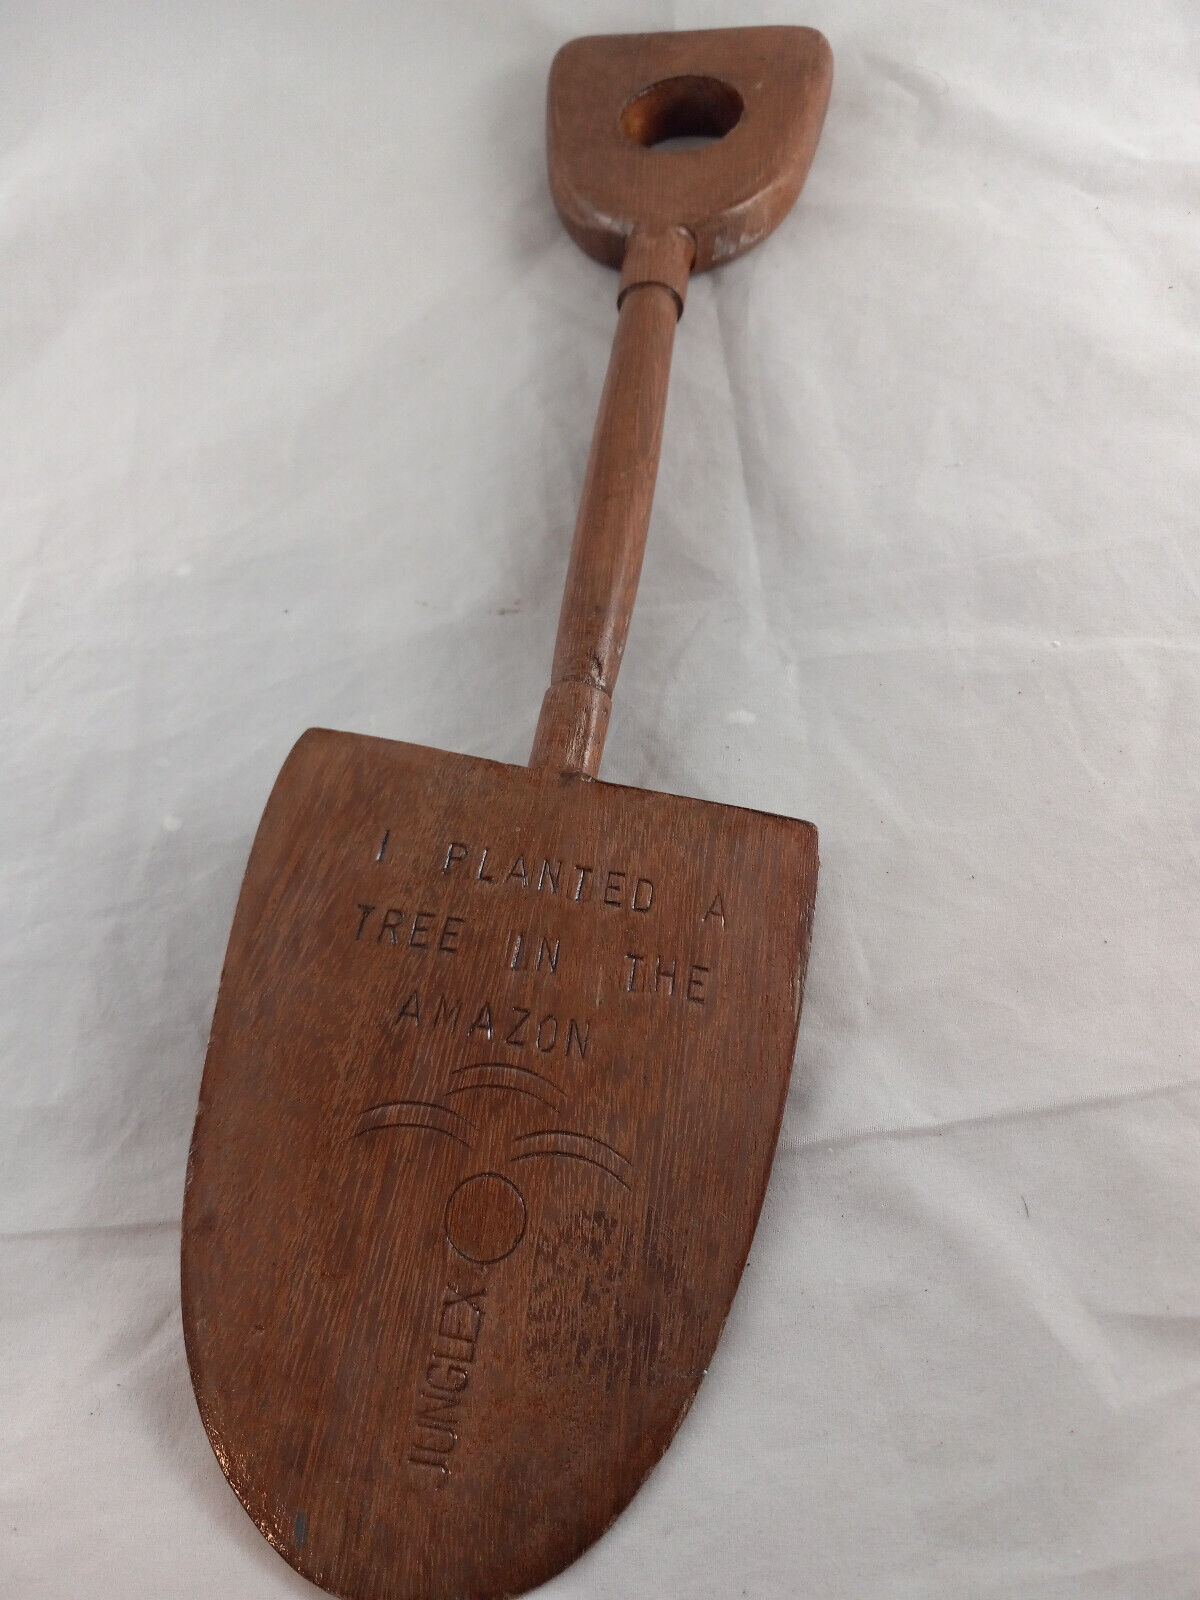 Amazon Forrest Souvenir Original hand carved wood shovel I planted a tree in the